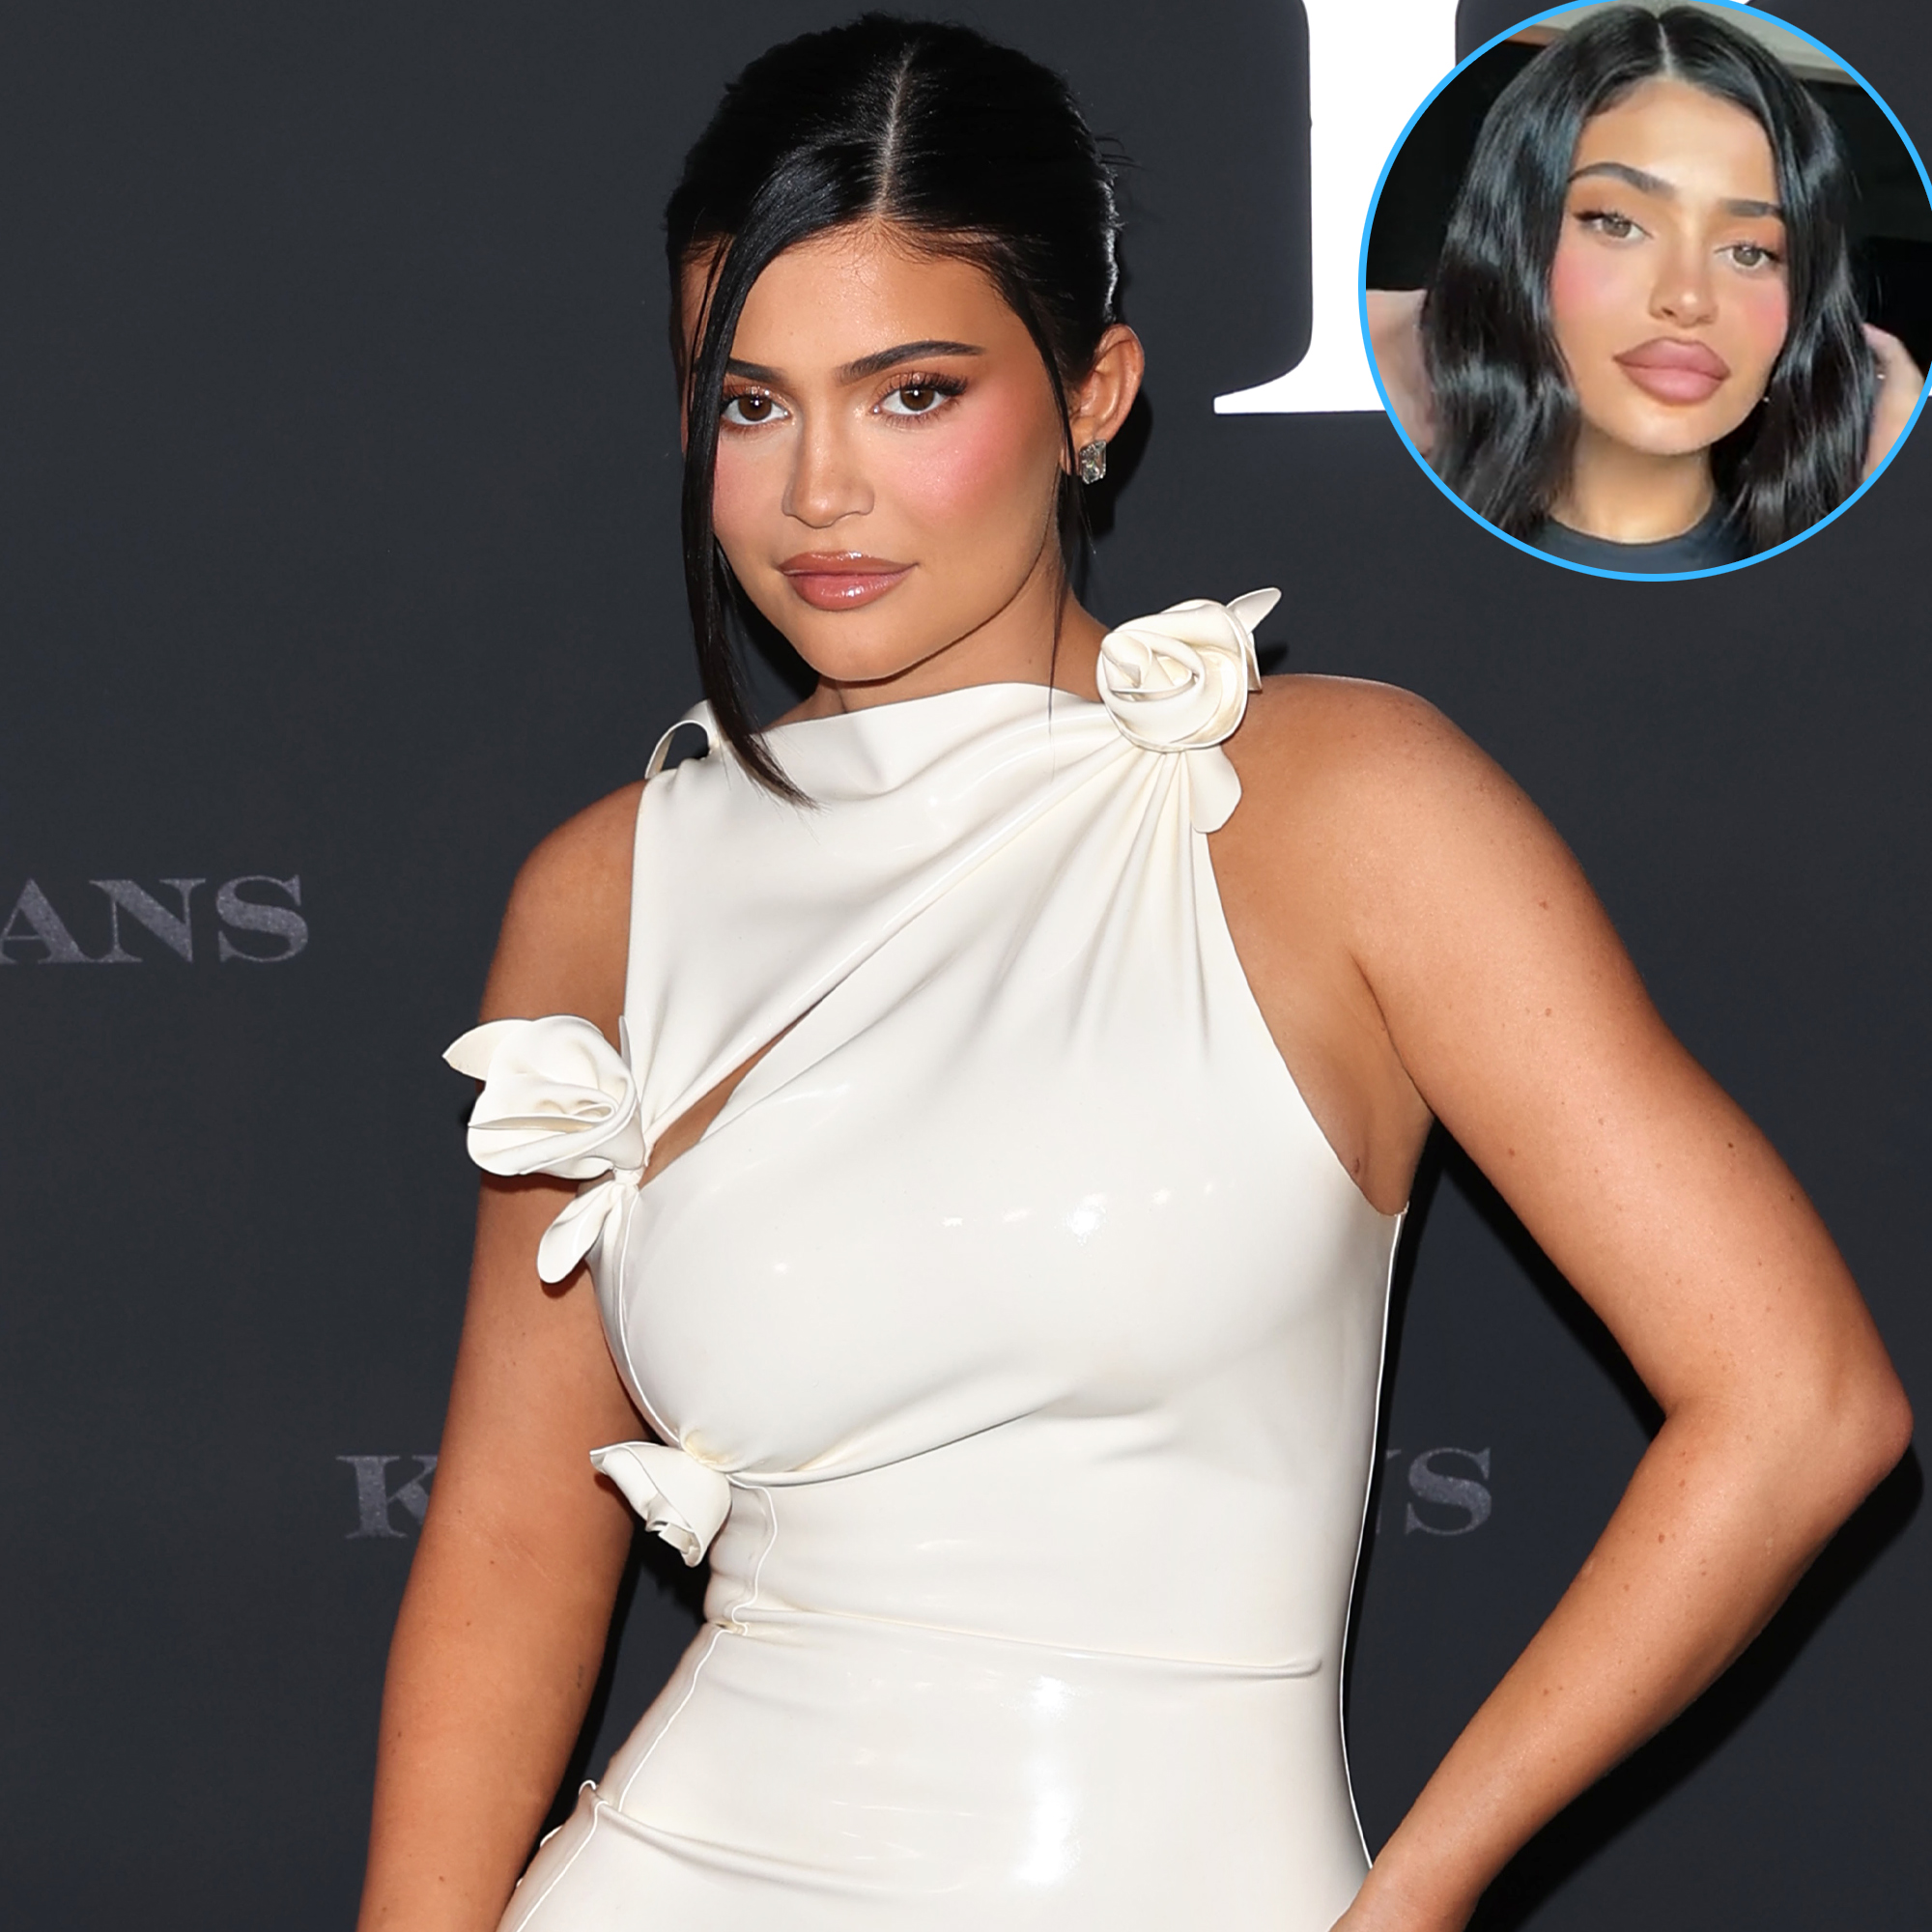 Kylie Jenner sparks backlash with alleged $200,000 gift for Stormi: 'Read  the room